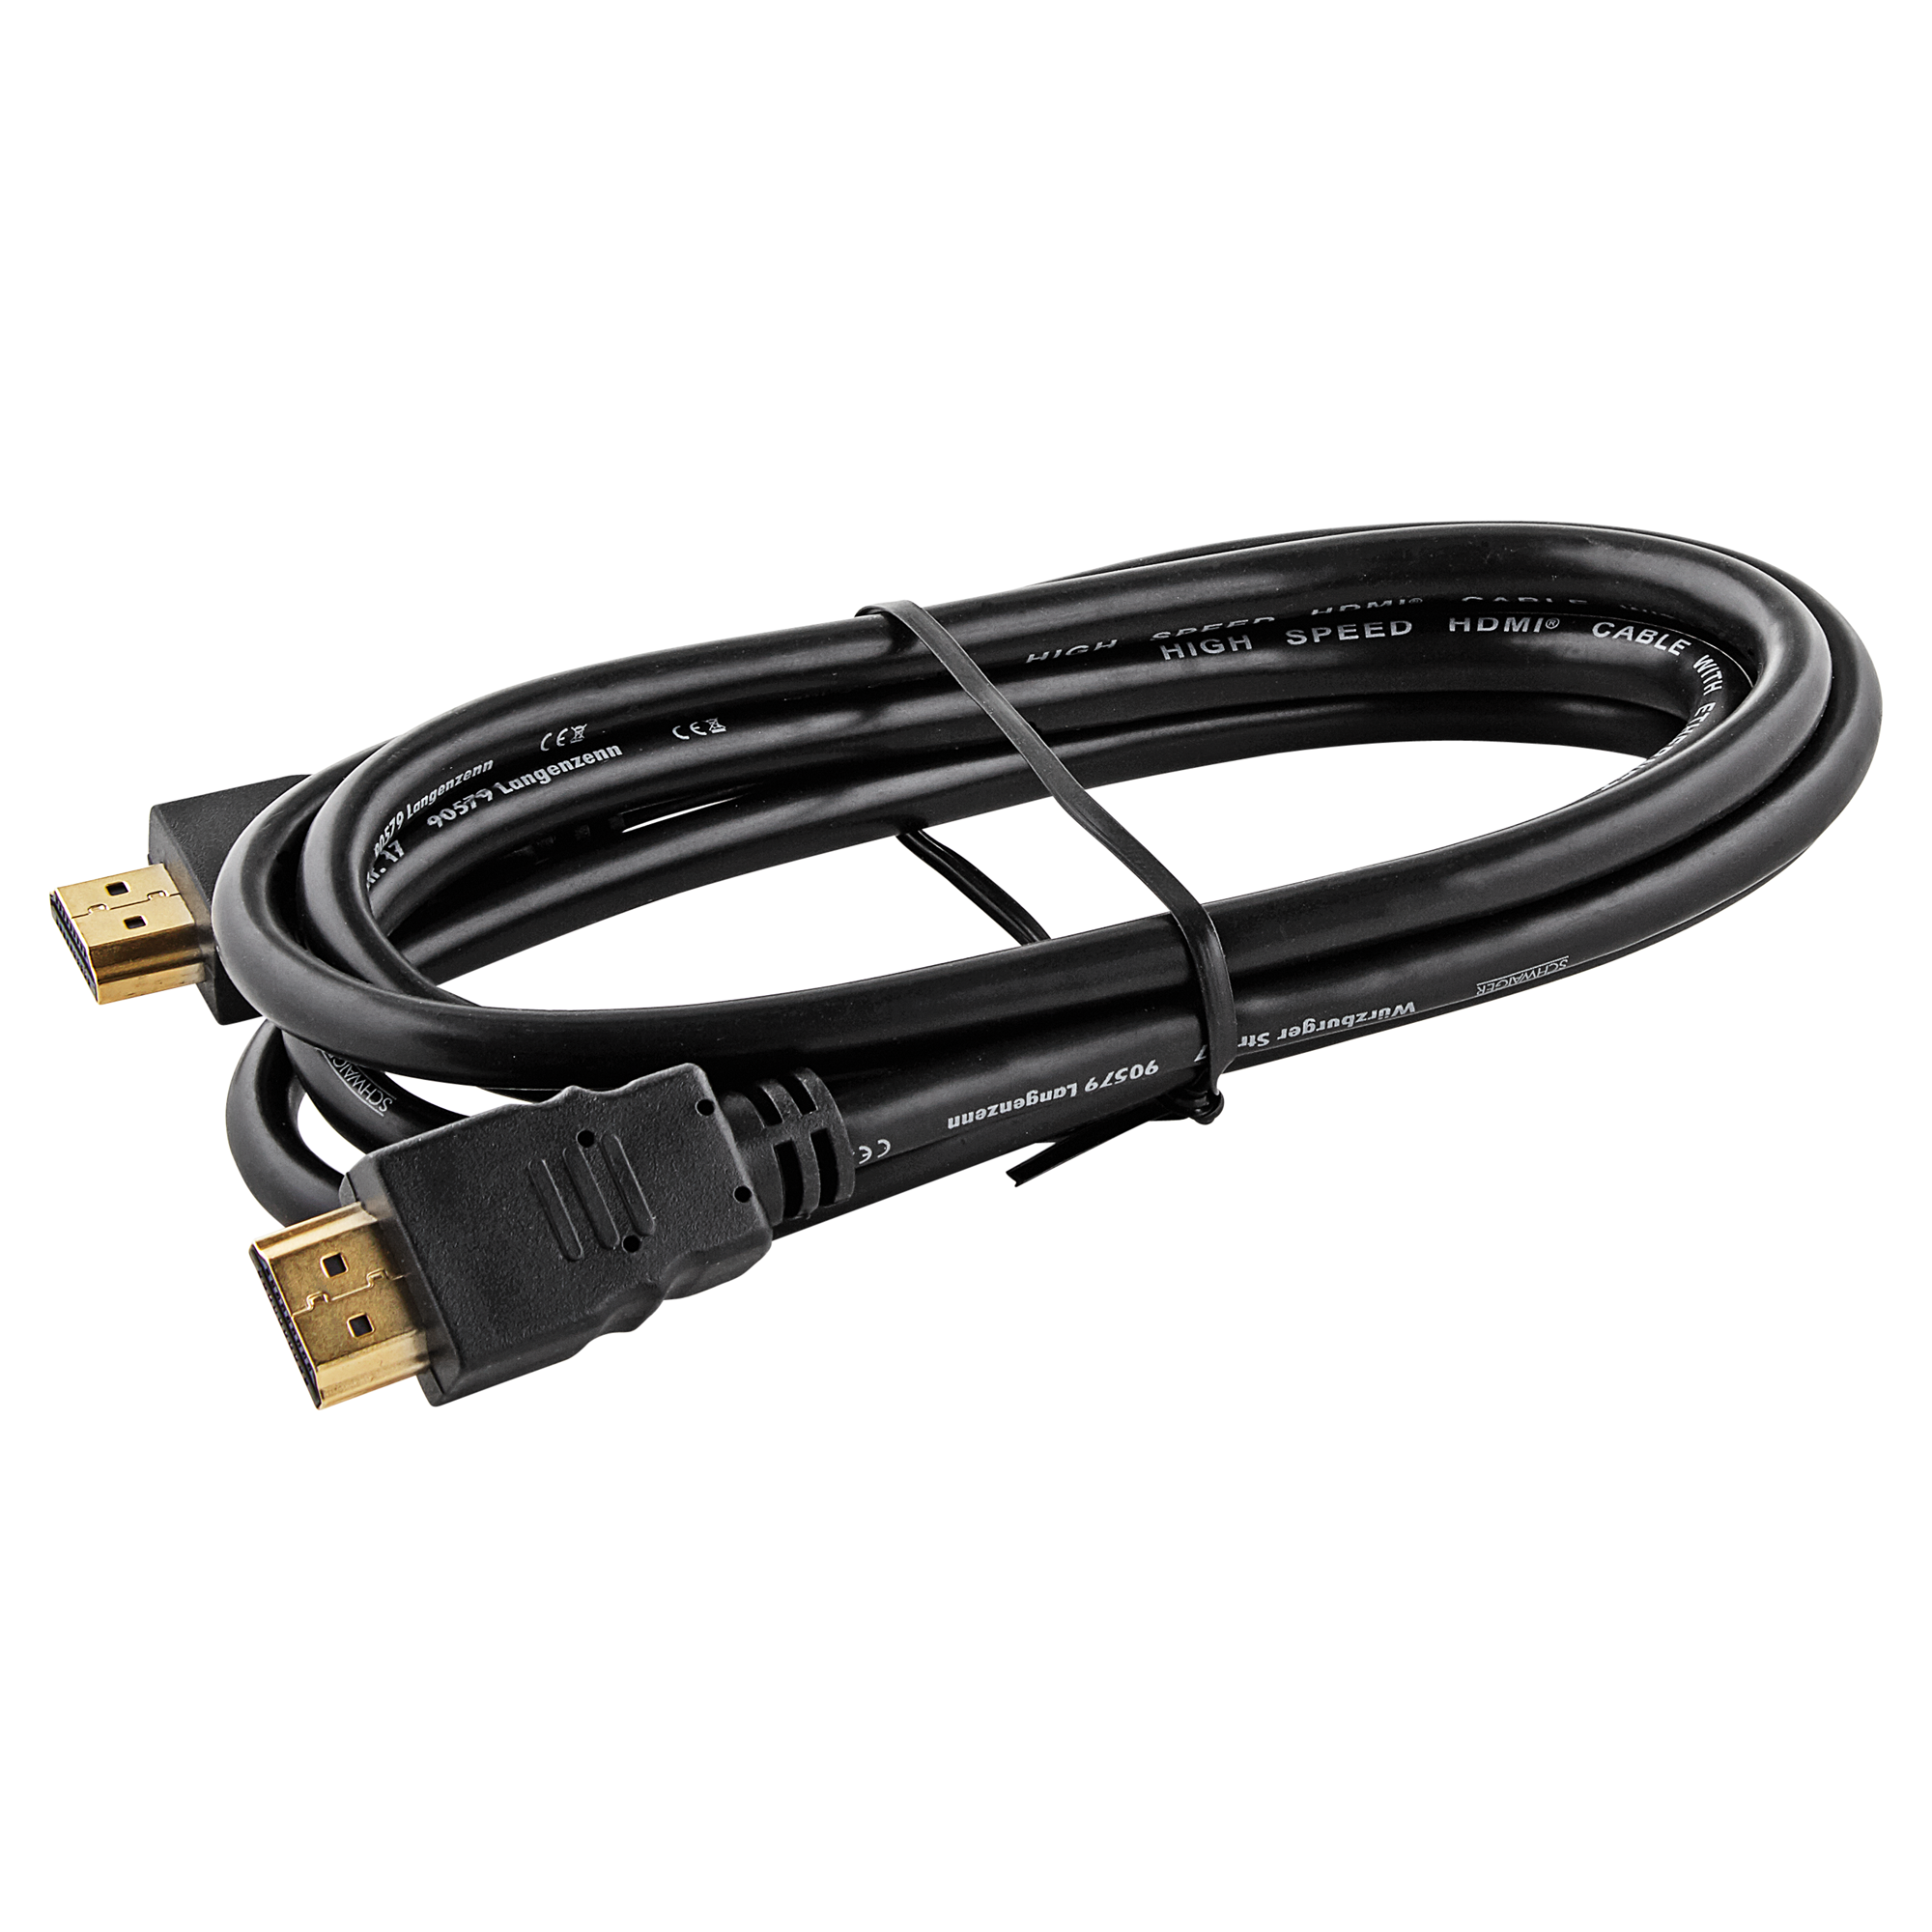 HDMI-Kabel schwarz 1,5 m + product picture